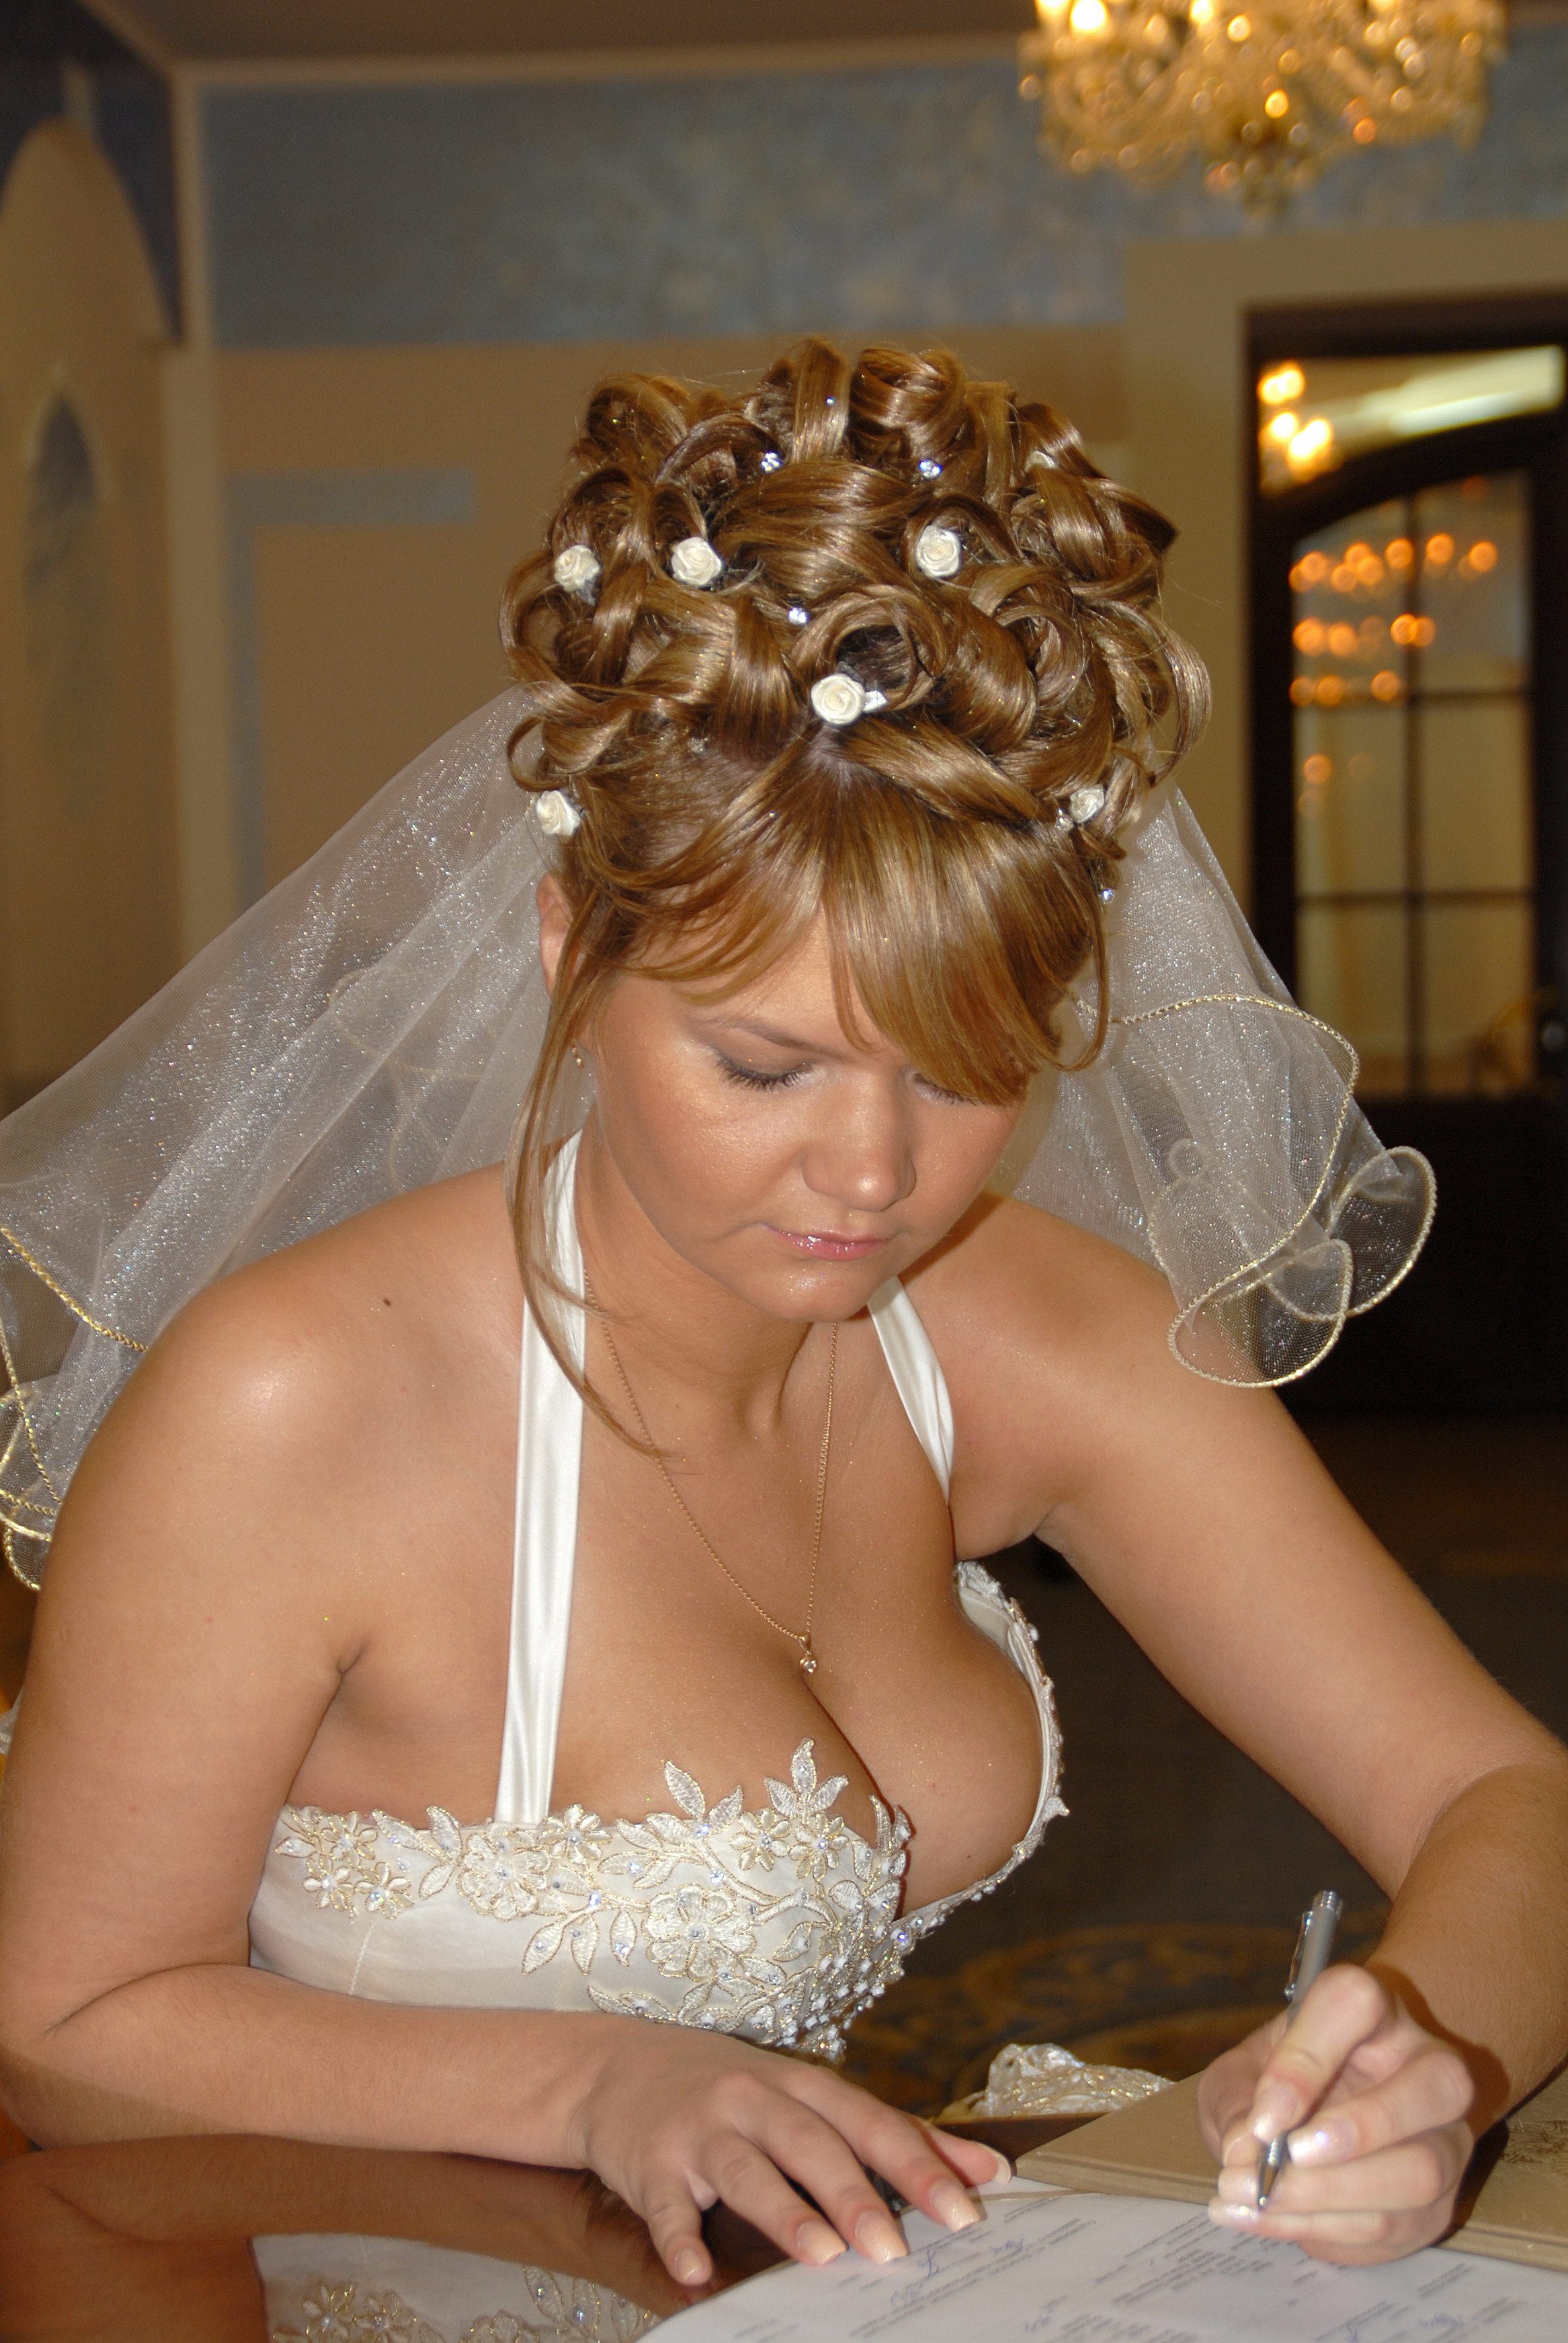 Huge tits bride cheats on her wedding day with the best man